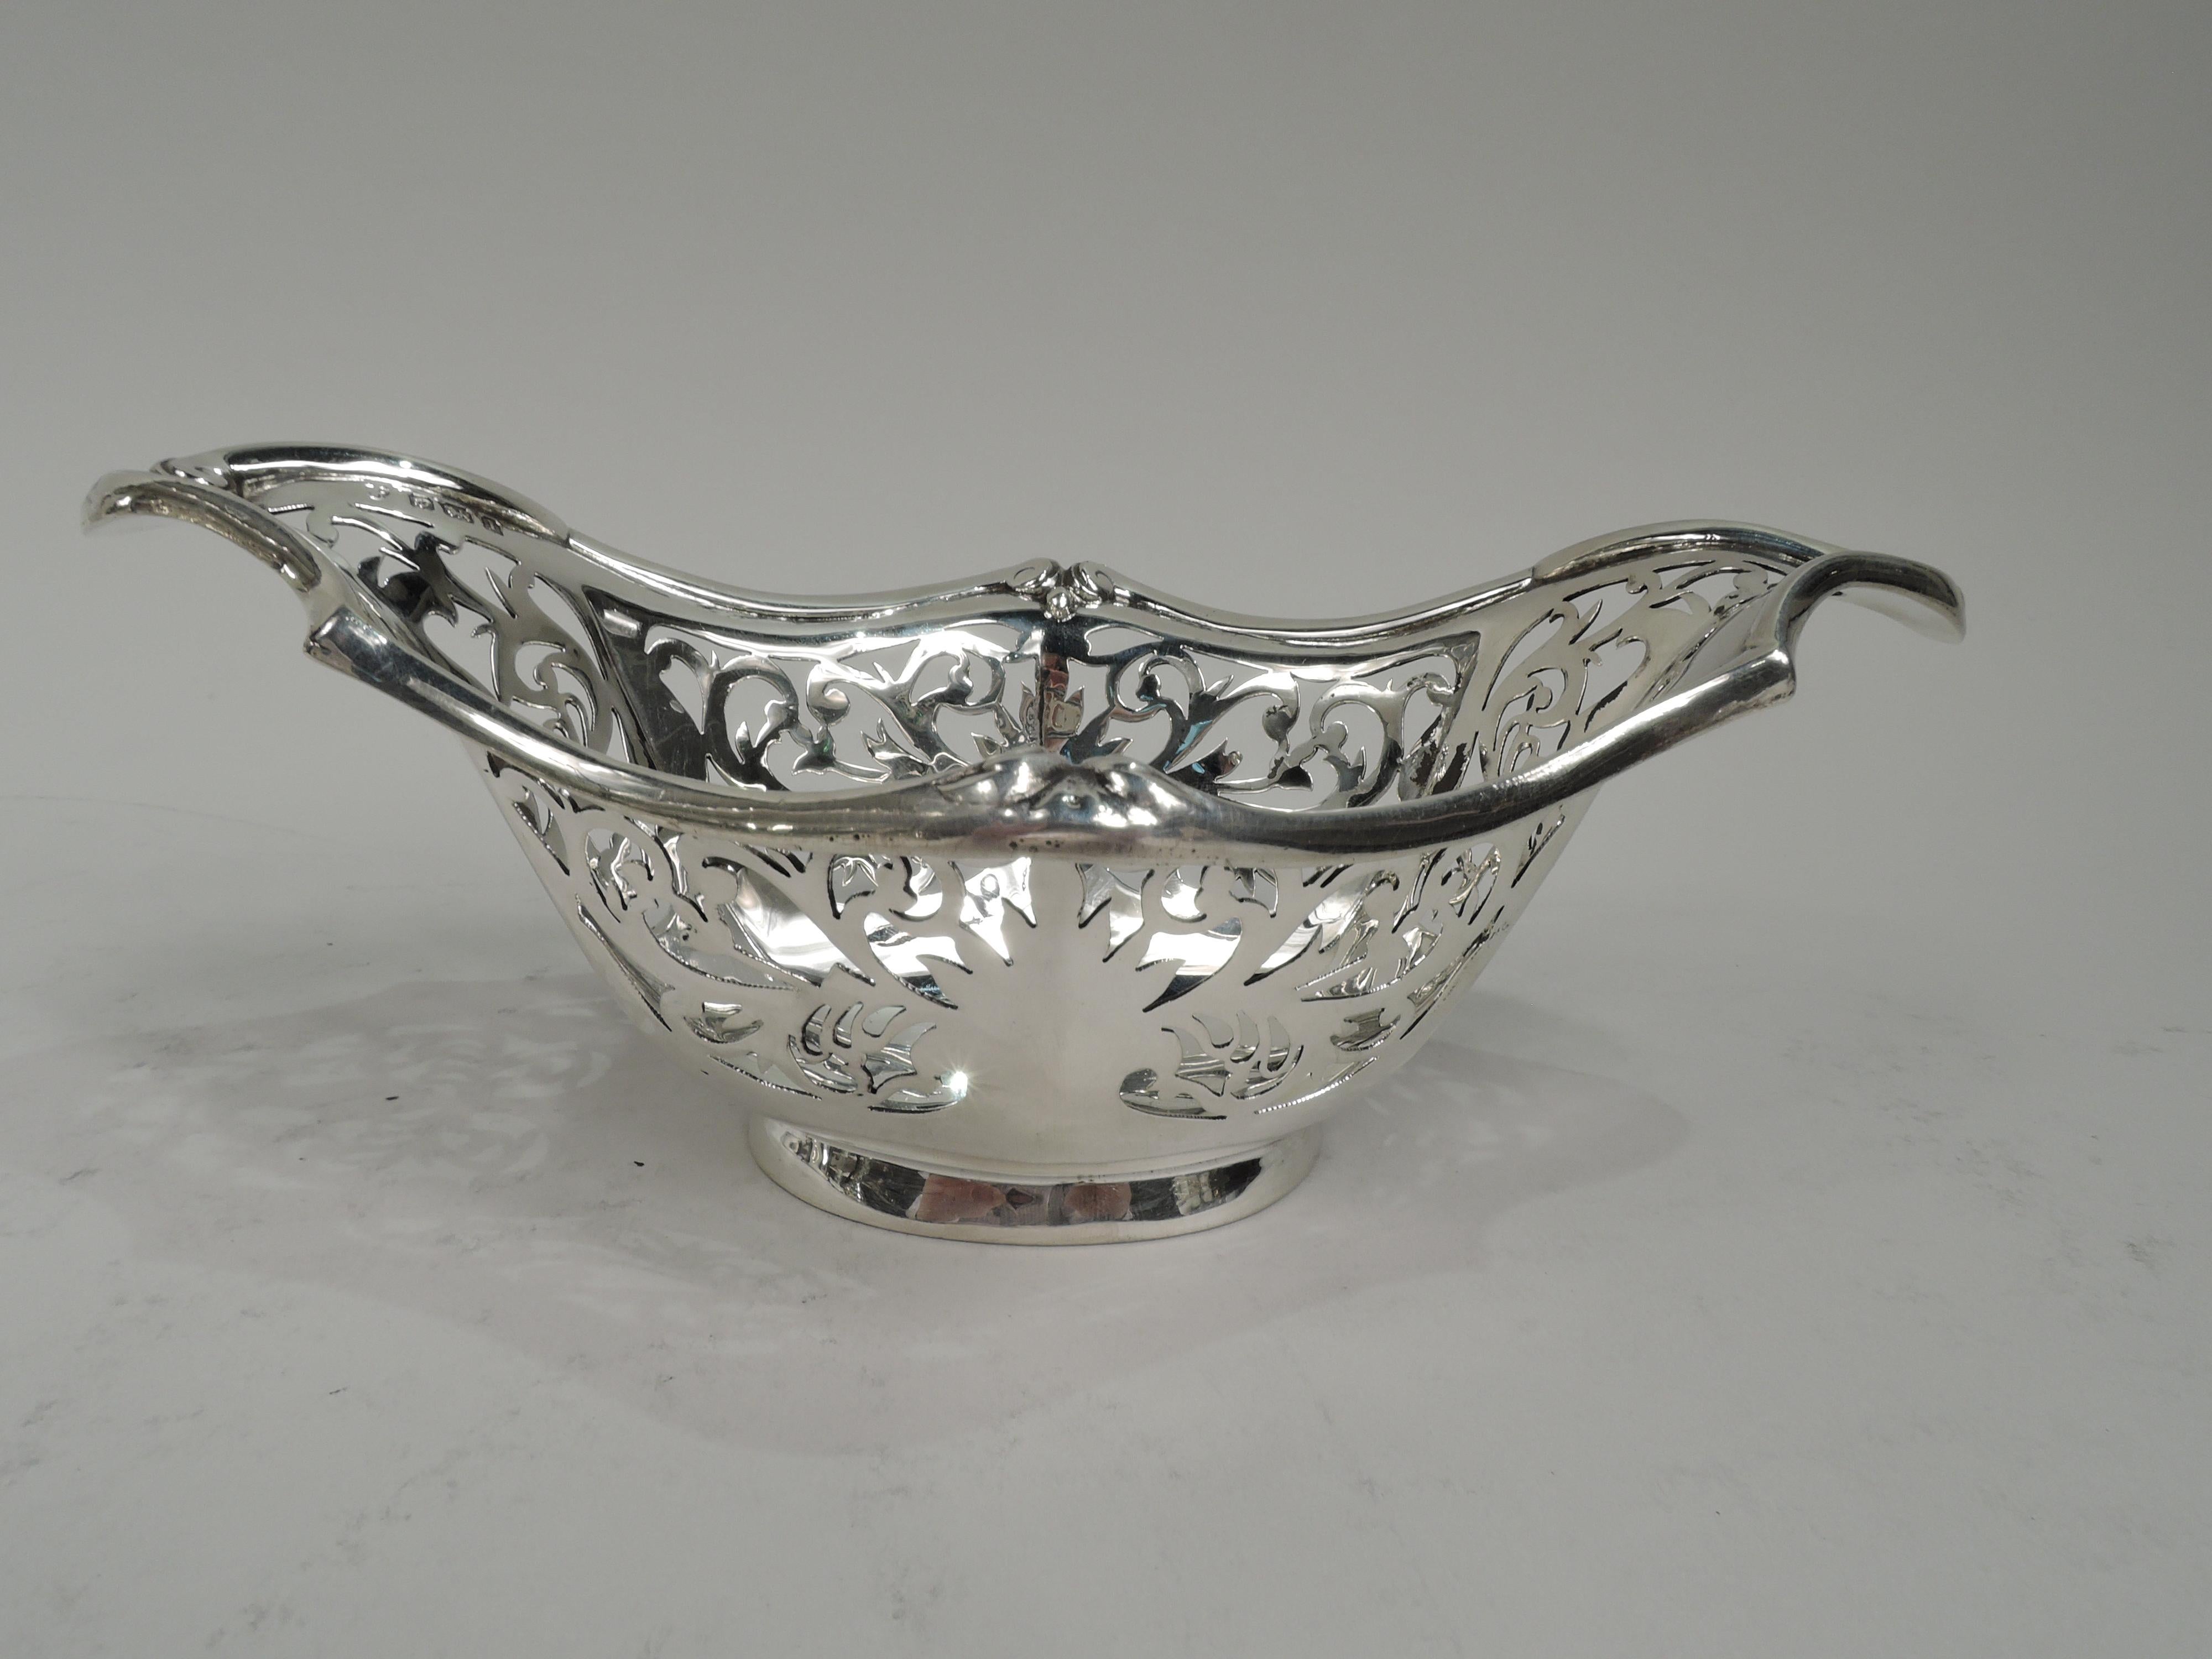 Edwardian Classical sterling silver bowl. Made by Williams, Ltd in Birmingham in 1910. Solid and faceted oval well. Sides tapering and faceted with open leafing scrollwork. Rim molded and asymmetrical with leaf-inset volute scrolls. Short and